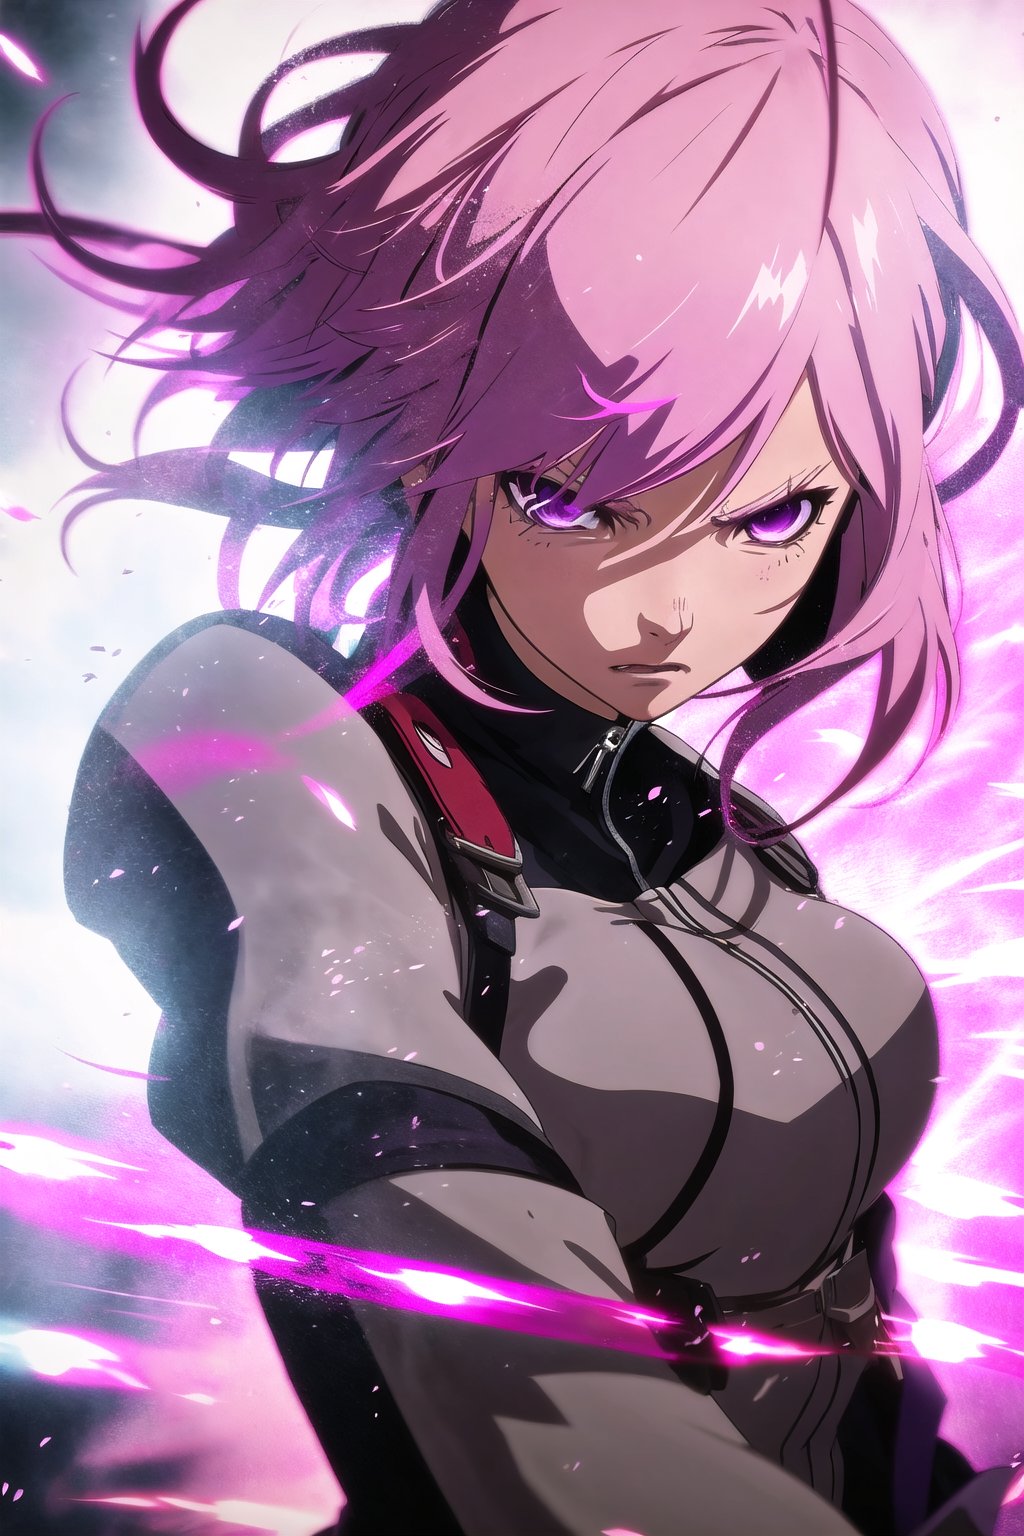 guiltys, angry, a girl, purple eyes, pink hair, fighting, upper body, (bokeh:1.1), depth of field, by Akihiko Yoshida, tracers, vfx, splashes, lightning, light particles, white background